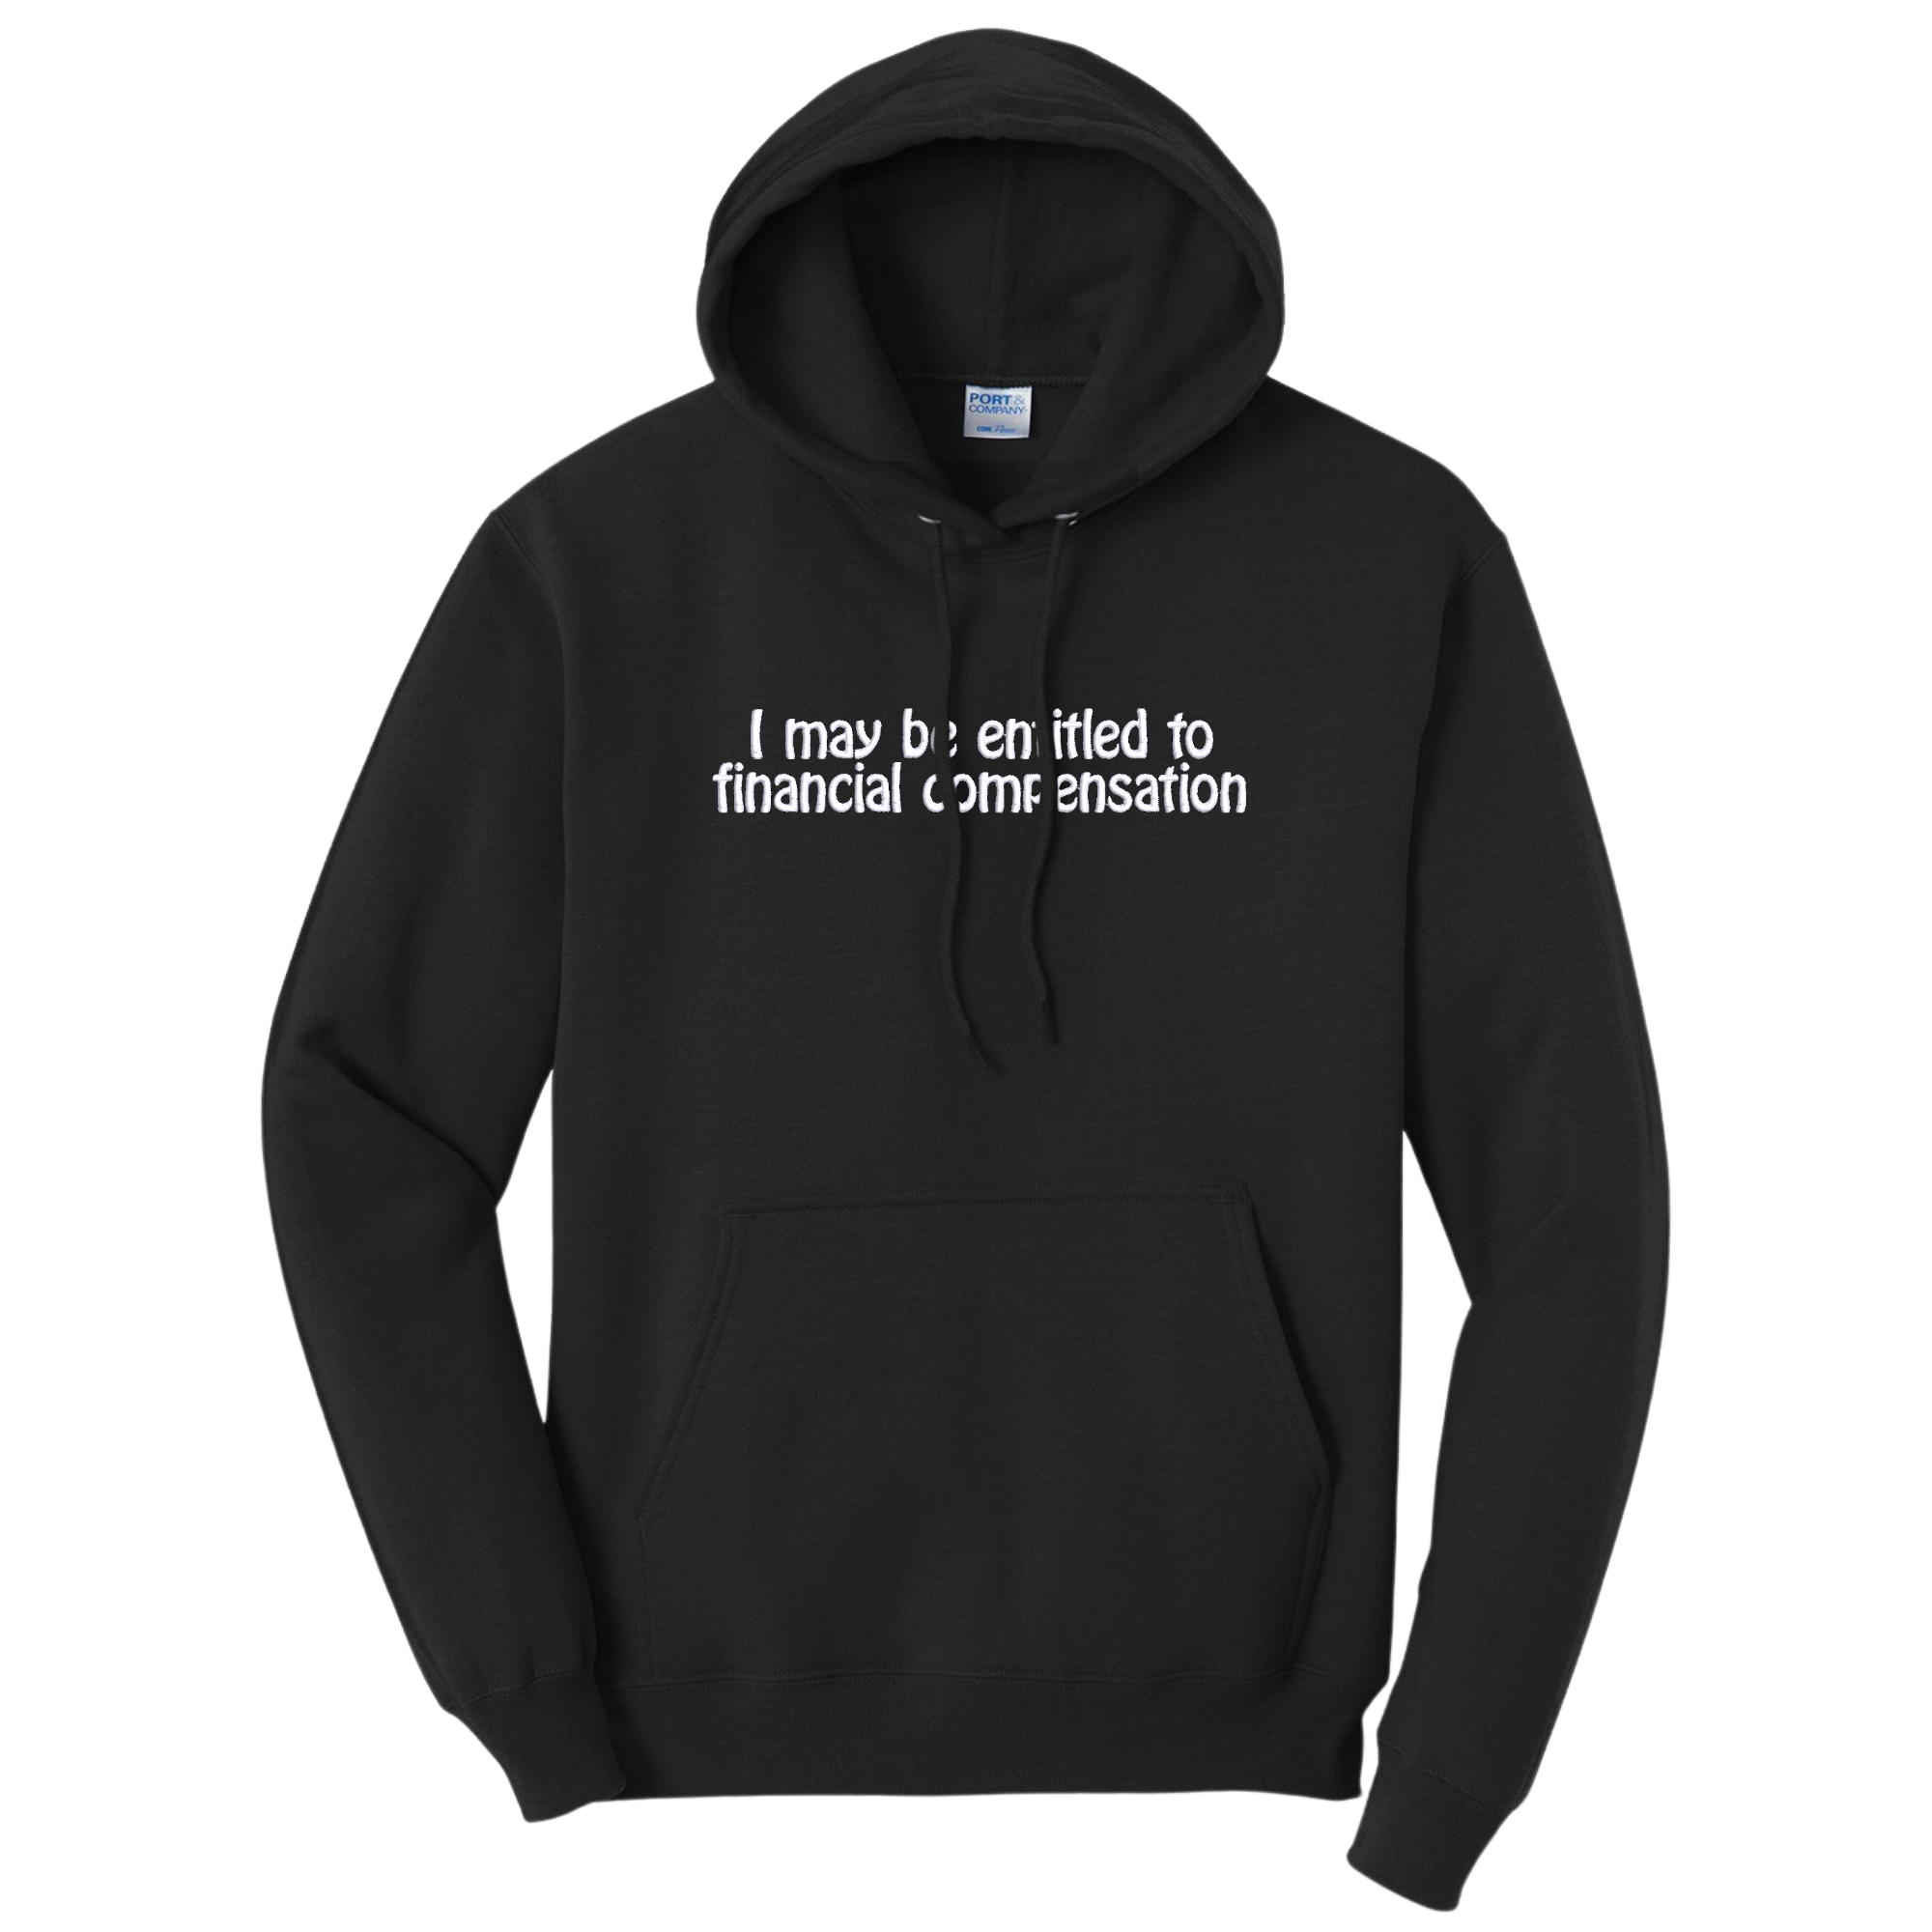 I May Be Entitled To Financial Compensation Black Hoodie, Unisex